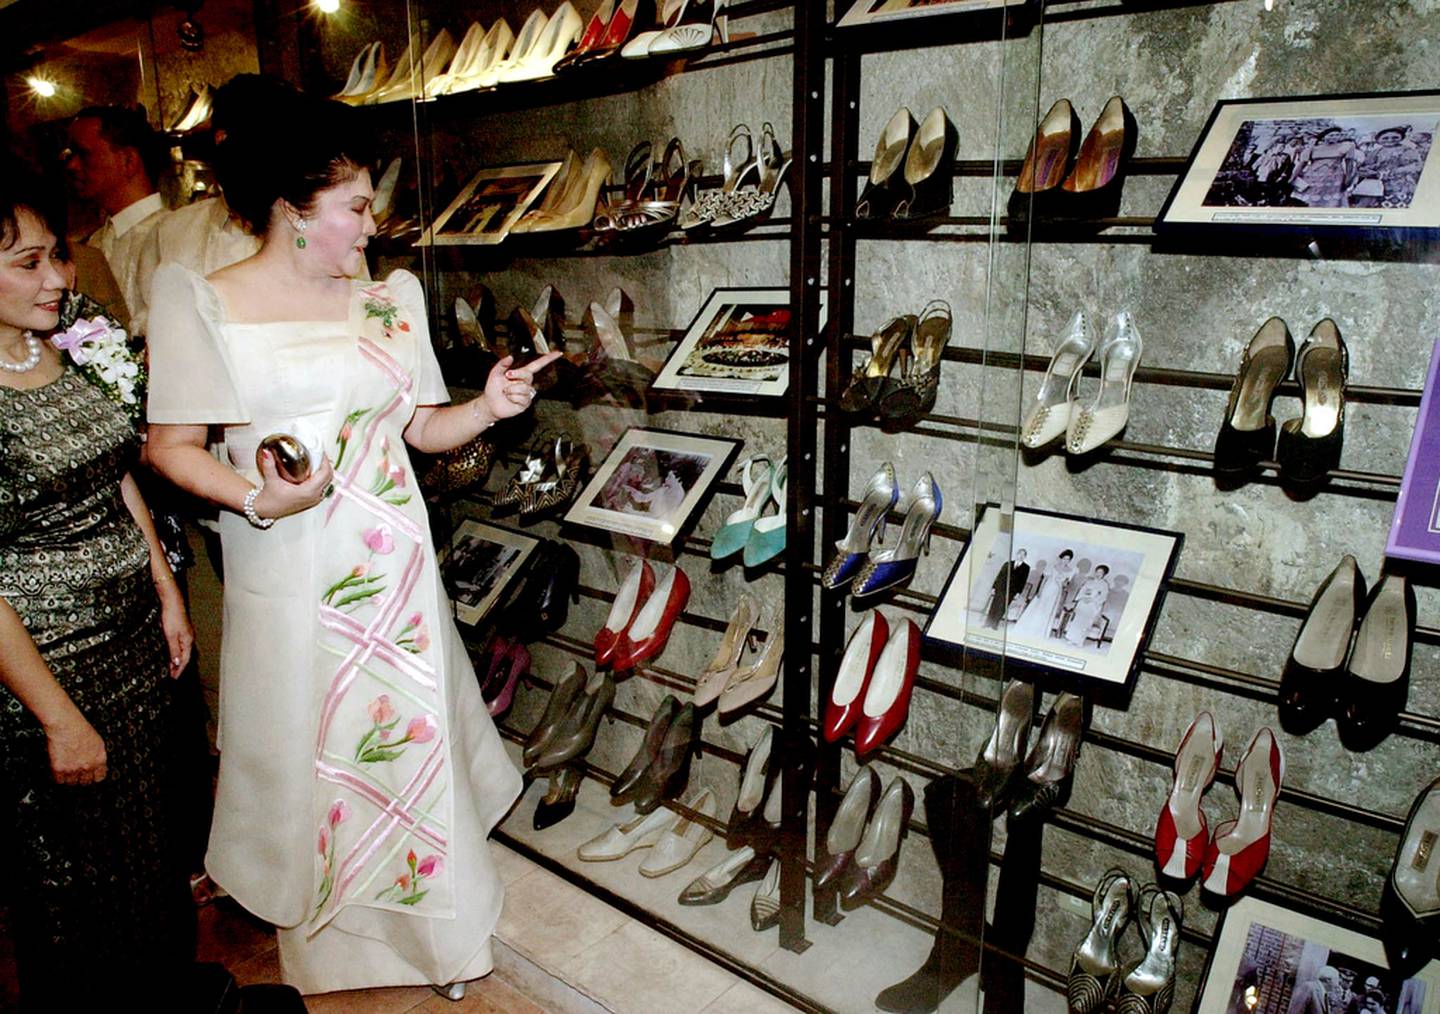 Imelda Marco, looks at her famous shoe collection after opening the Marikina Shoe Museum in 2001. AFP